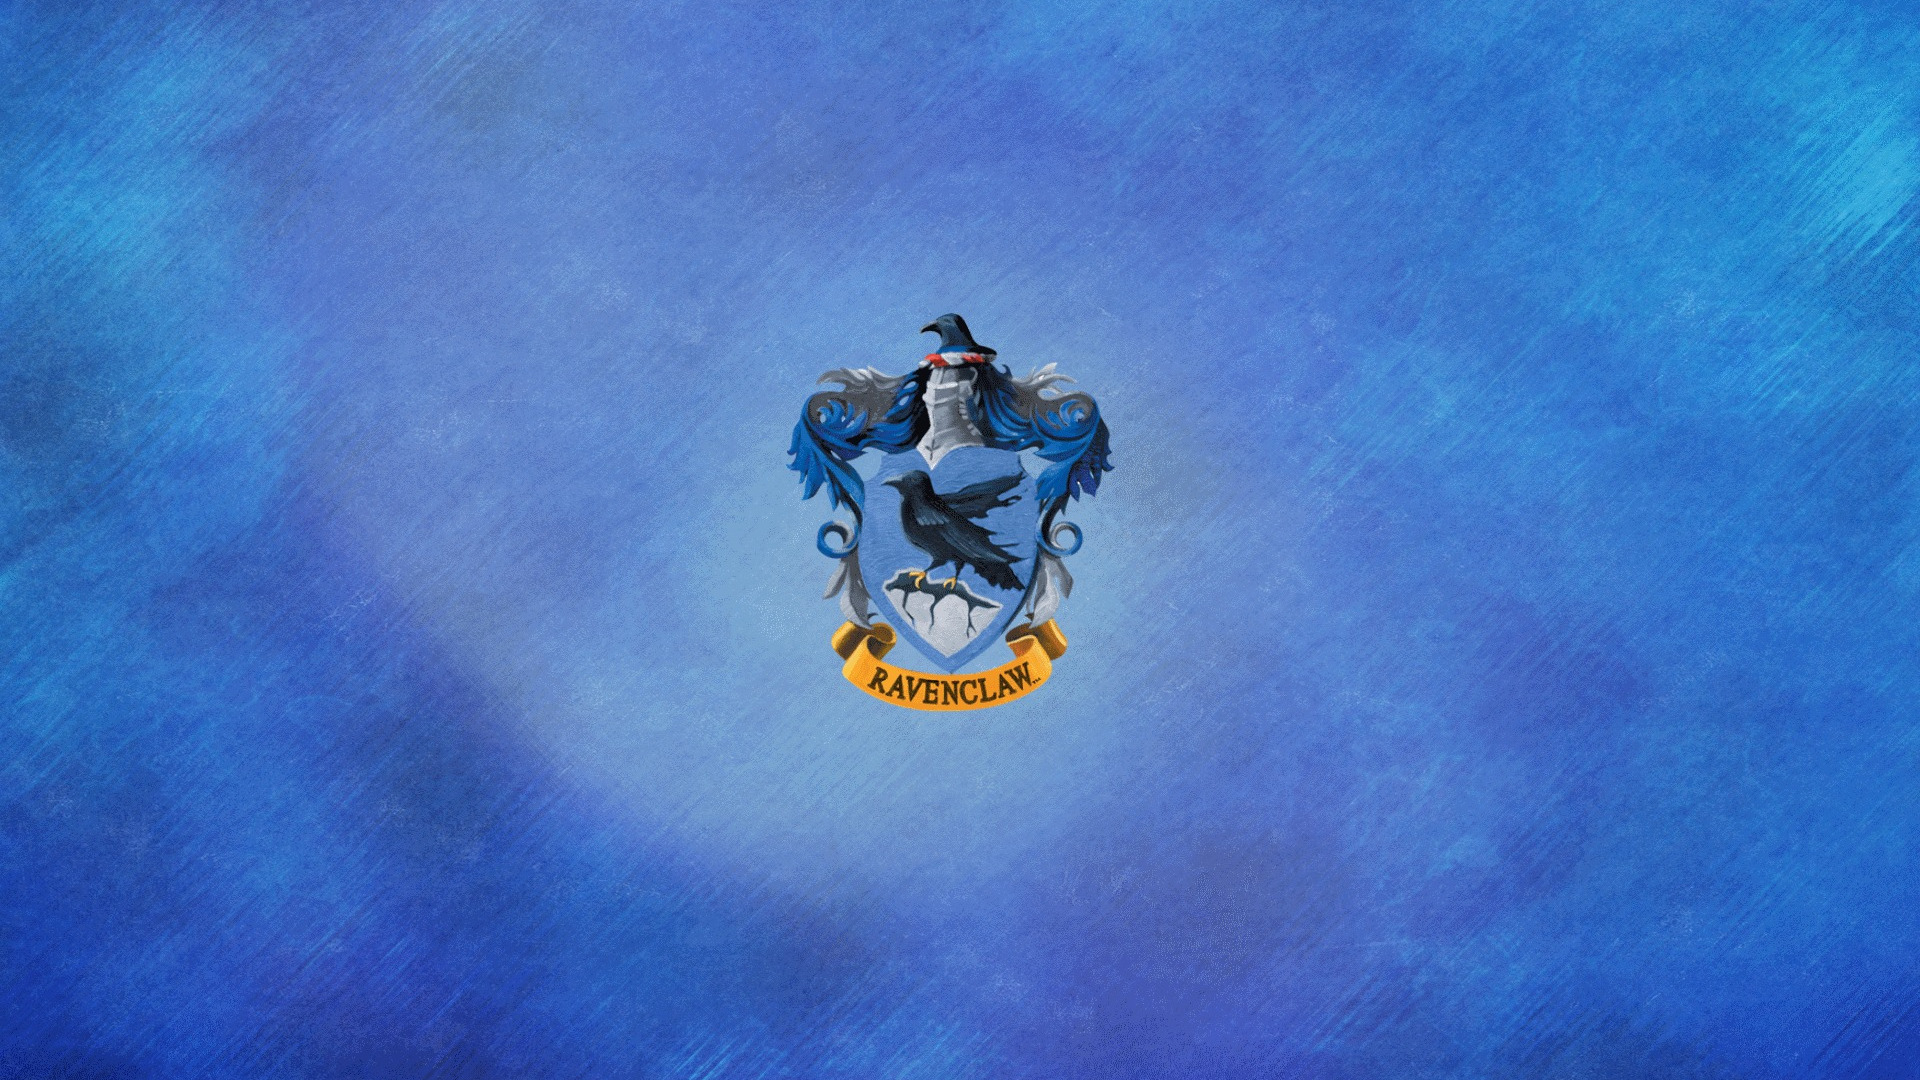 1920x1080 Download wallpaper Wallpaper, ravenclaw, , Harry Potter, franchise, Ravenclaw, garry potter, section minimalism in resoluti